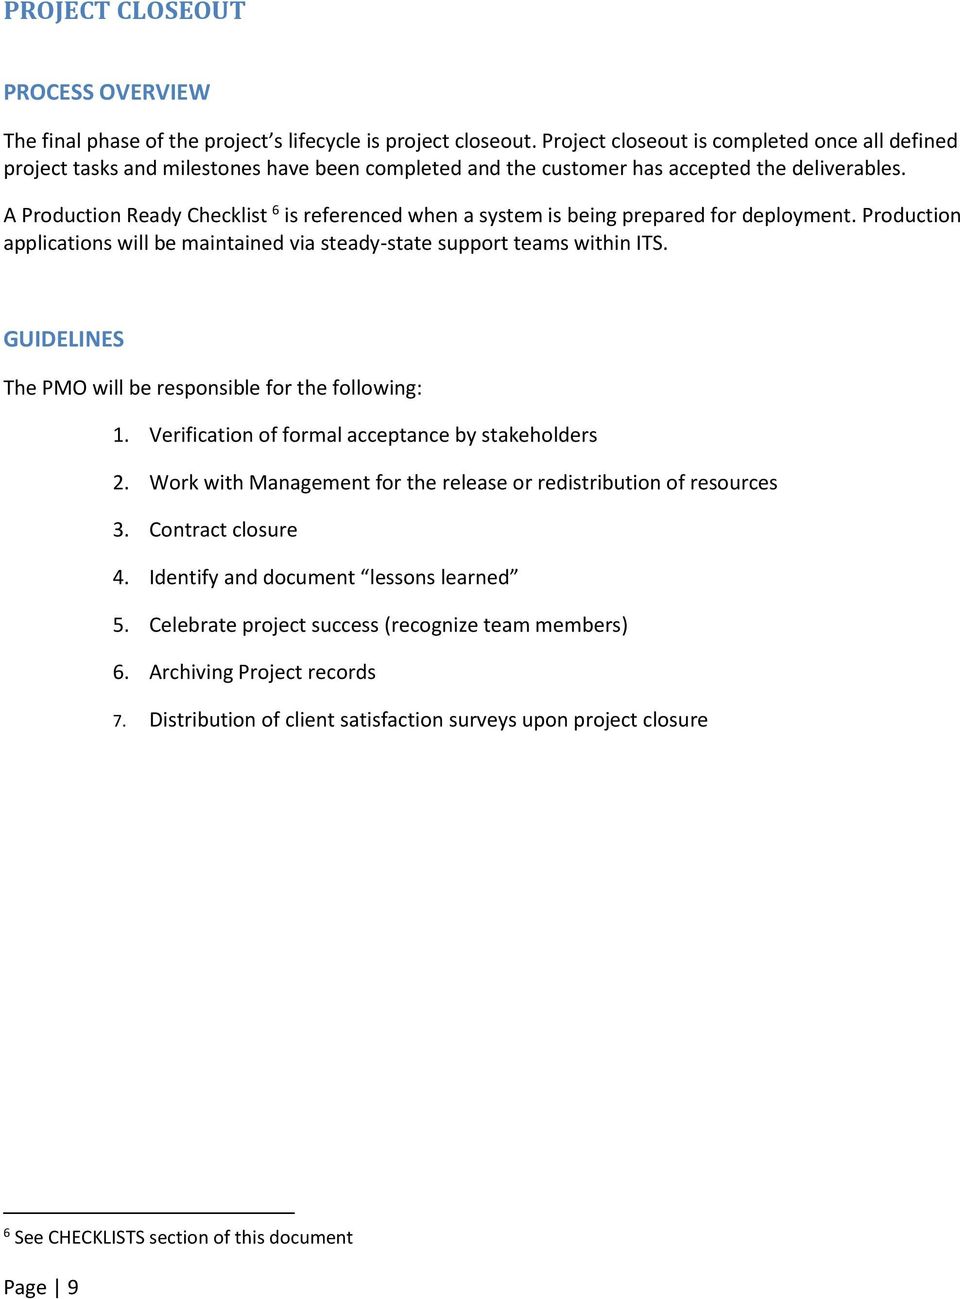 A Production Ready Checklist 6 is referenced when a system is being prepared for deployment. Production applications will be maintained via steady-state support teams within ITS.